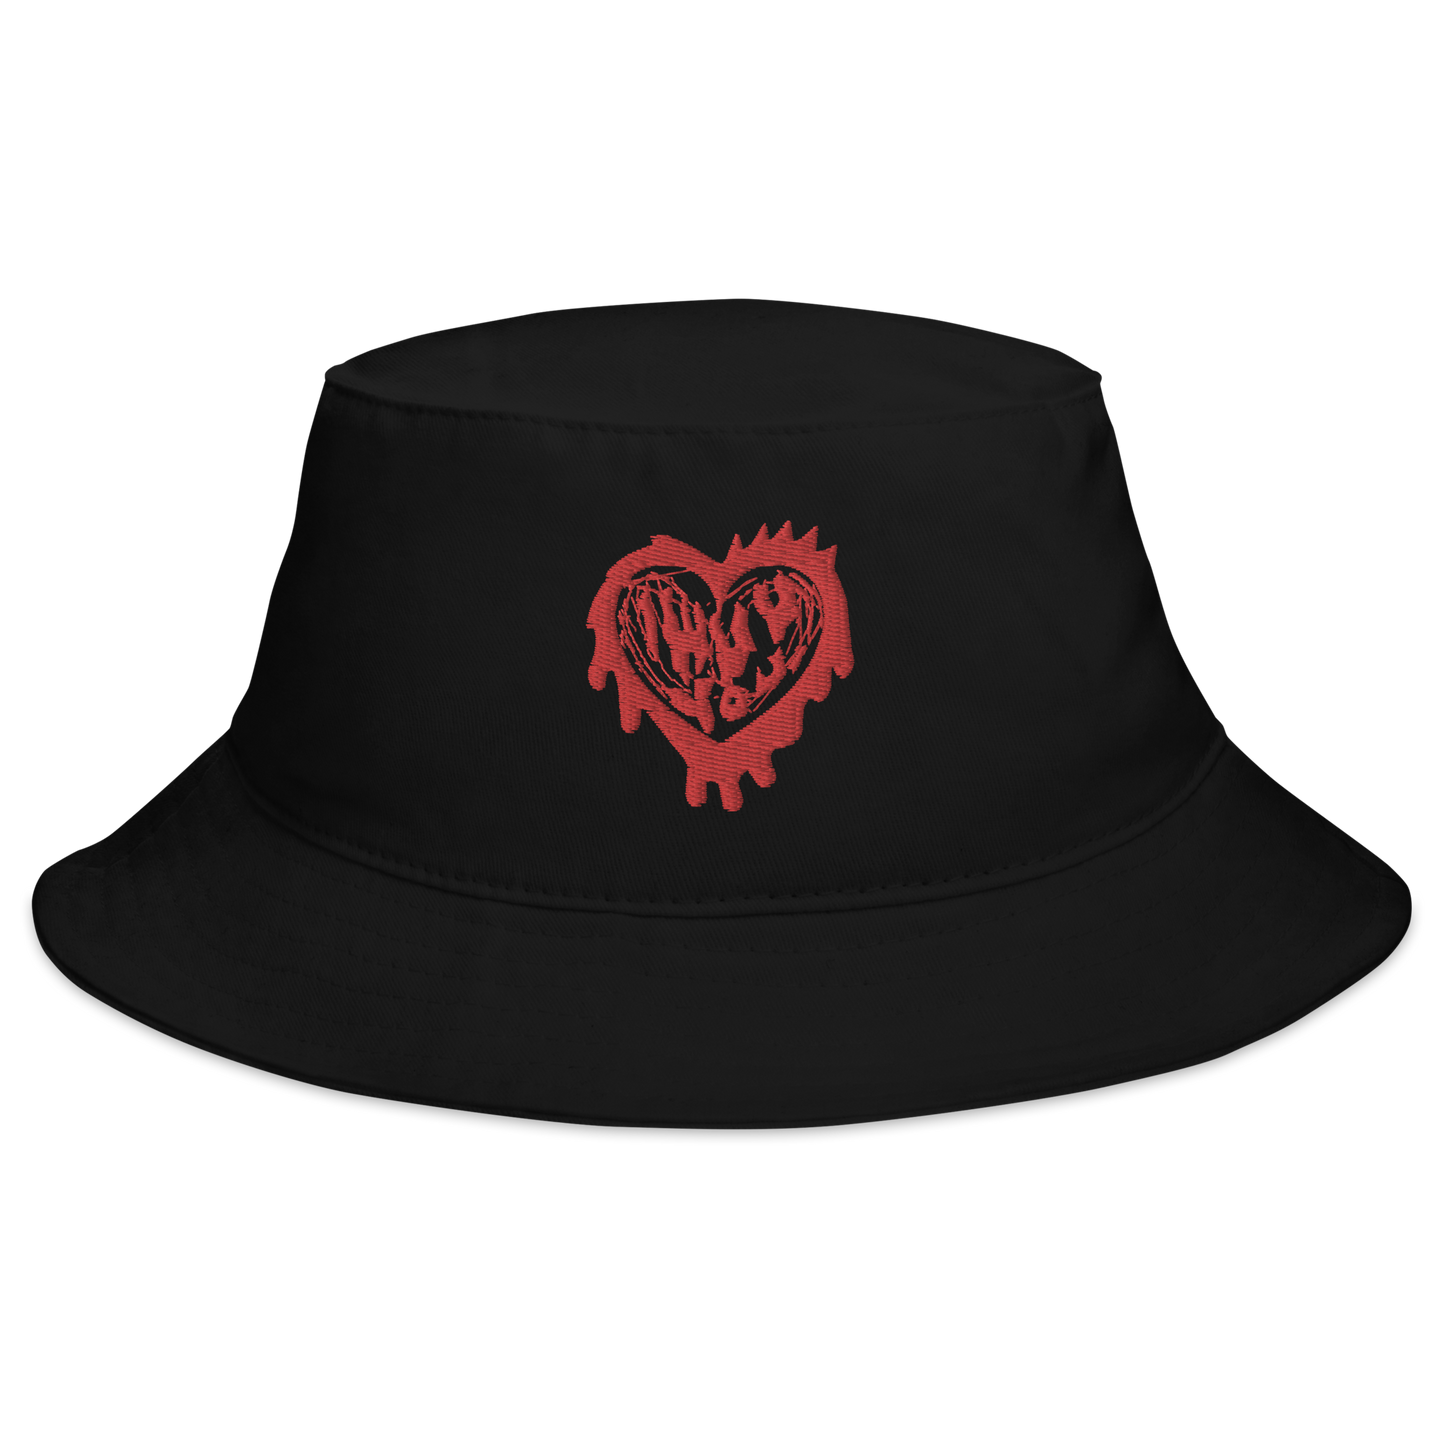 Wuv You Heart in Red on Black Bucket Hat